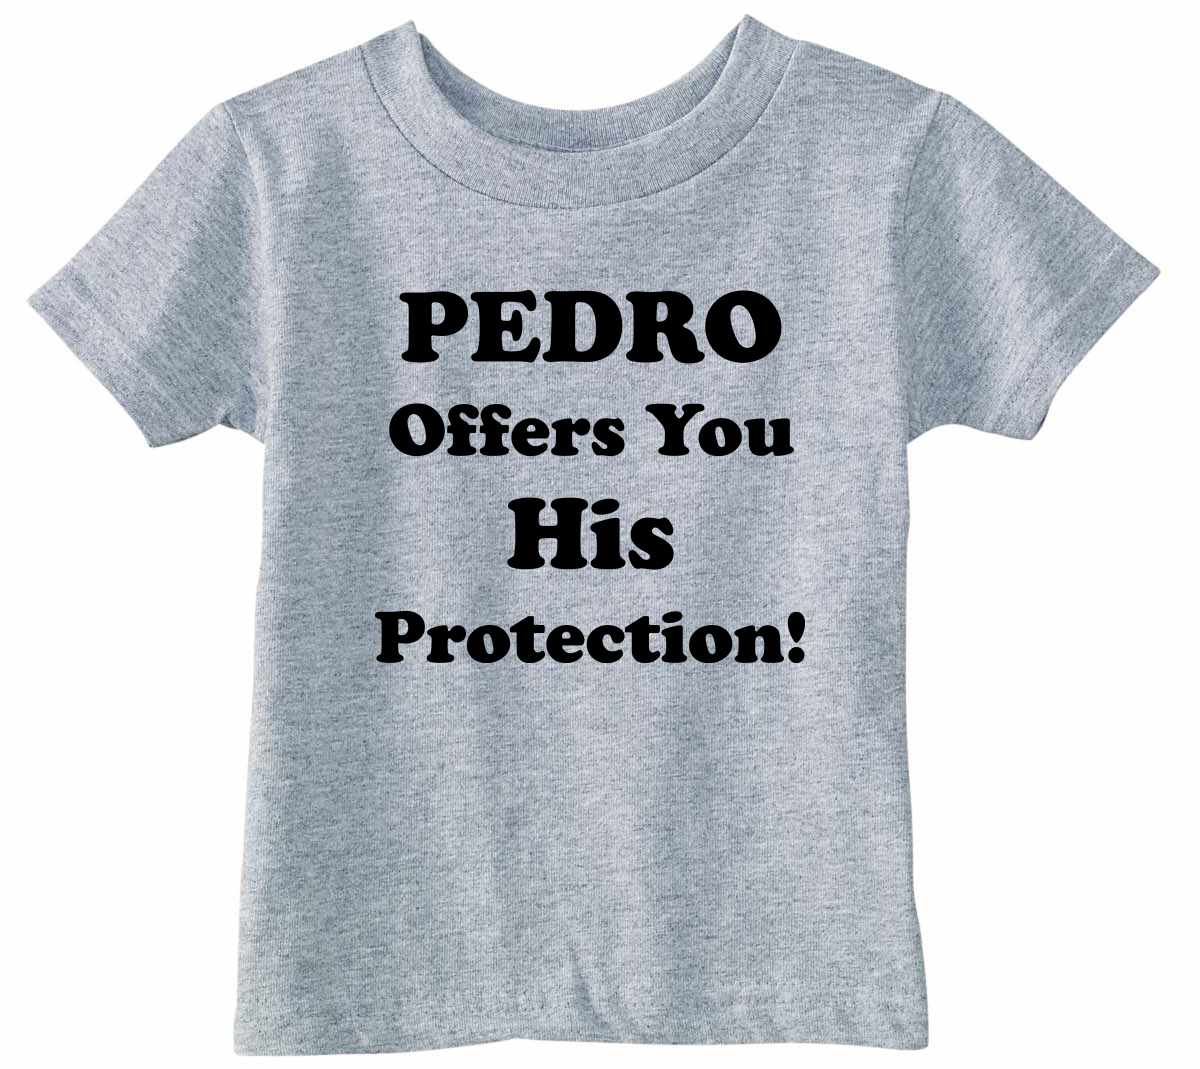 PEDRO OFFERS YOU HIS PROTECTION on Infant-Toddler T-Shirt (#385-7)